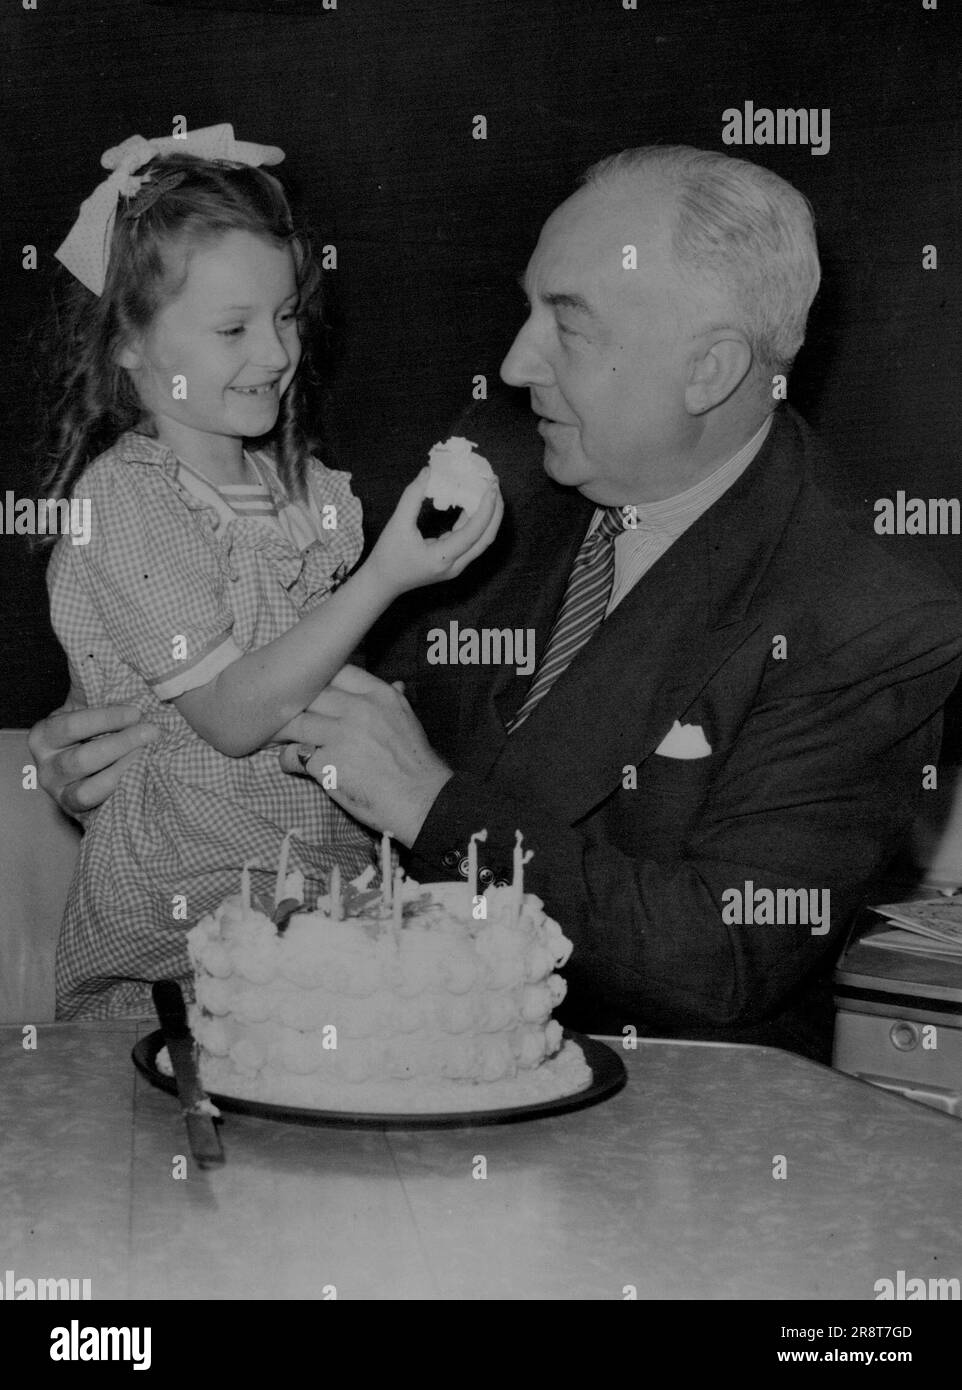 Tempting! Susan Celebrates Birthday On New Flight. Susan Gillette tempts Sir Miles Thomas, B.O.A.C. Chairman, with a piece of her eighth birthday cake, which she cut in the plane before leaving-on her 8,000 miles flight to Hong Kong. Sir Miles was there to inaugurate the first service. Inaugurating British Overseas Airways Corporation's first landplane service to Hong Kong, the Argonaut, new 36-ton, 40-seater, pressurised, air-conditioned monoplane left London Airport. Passengers included Mrs. B. Gillette of Bristol, and her four children, going out to Hong Kong to join her husband. One o… Stock Photo